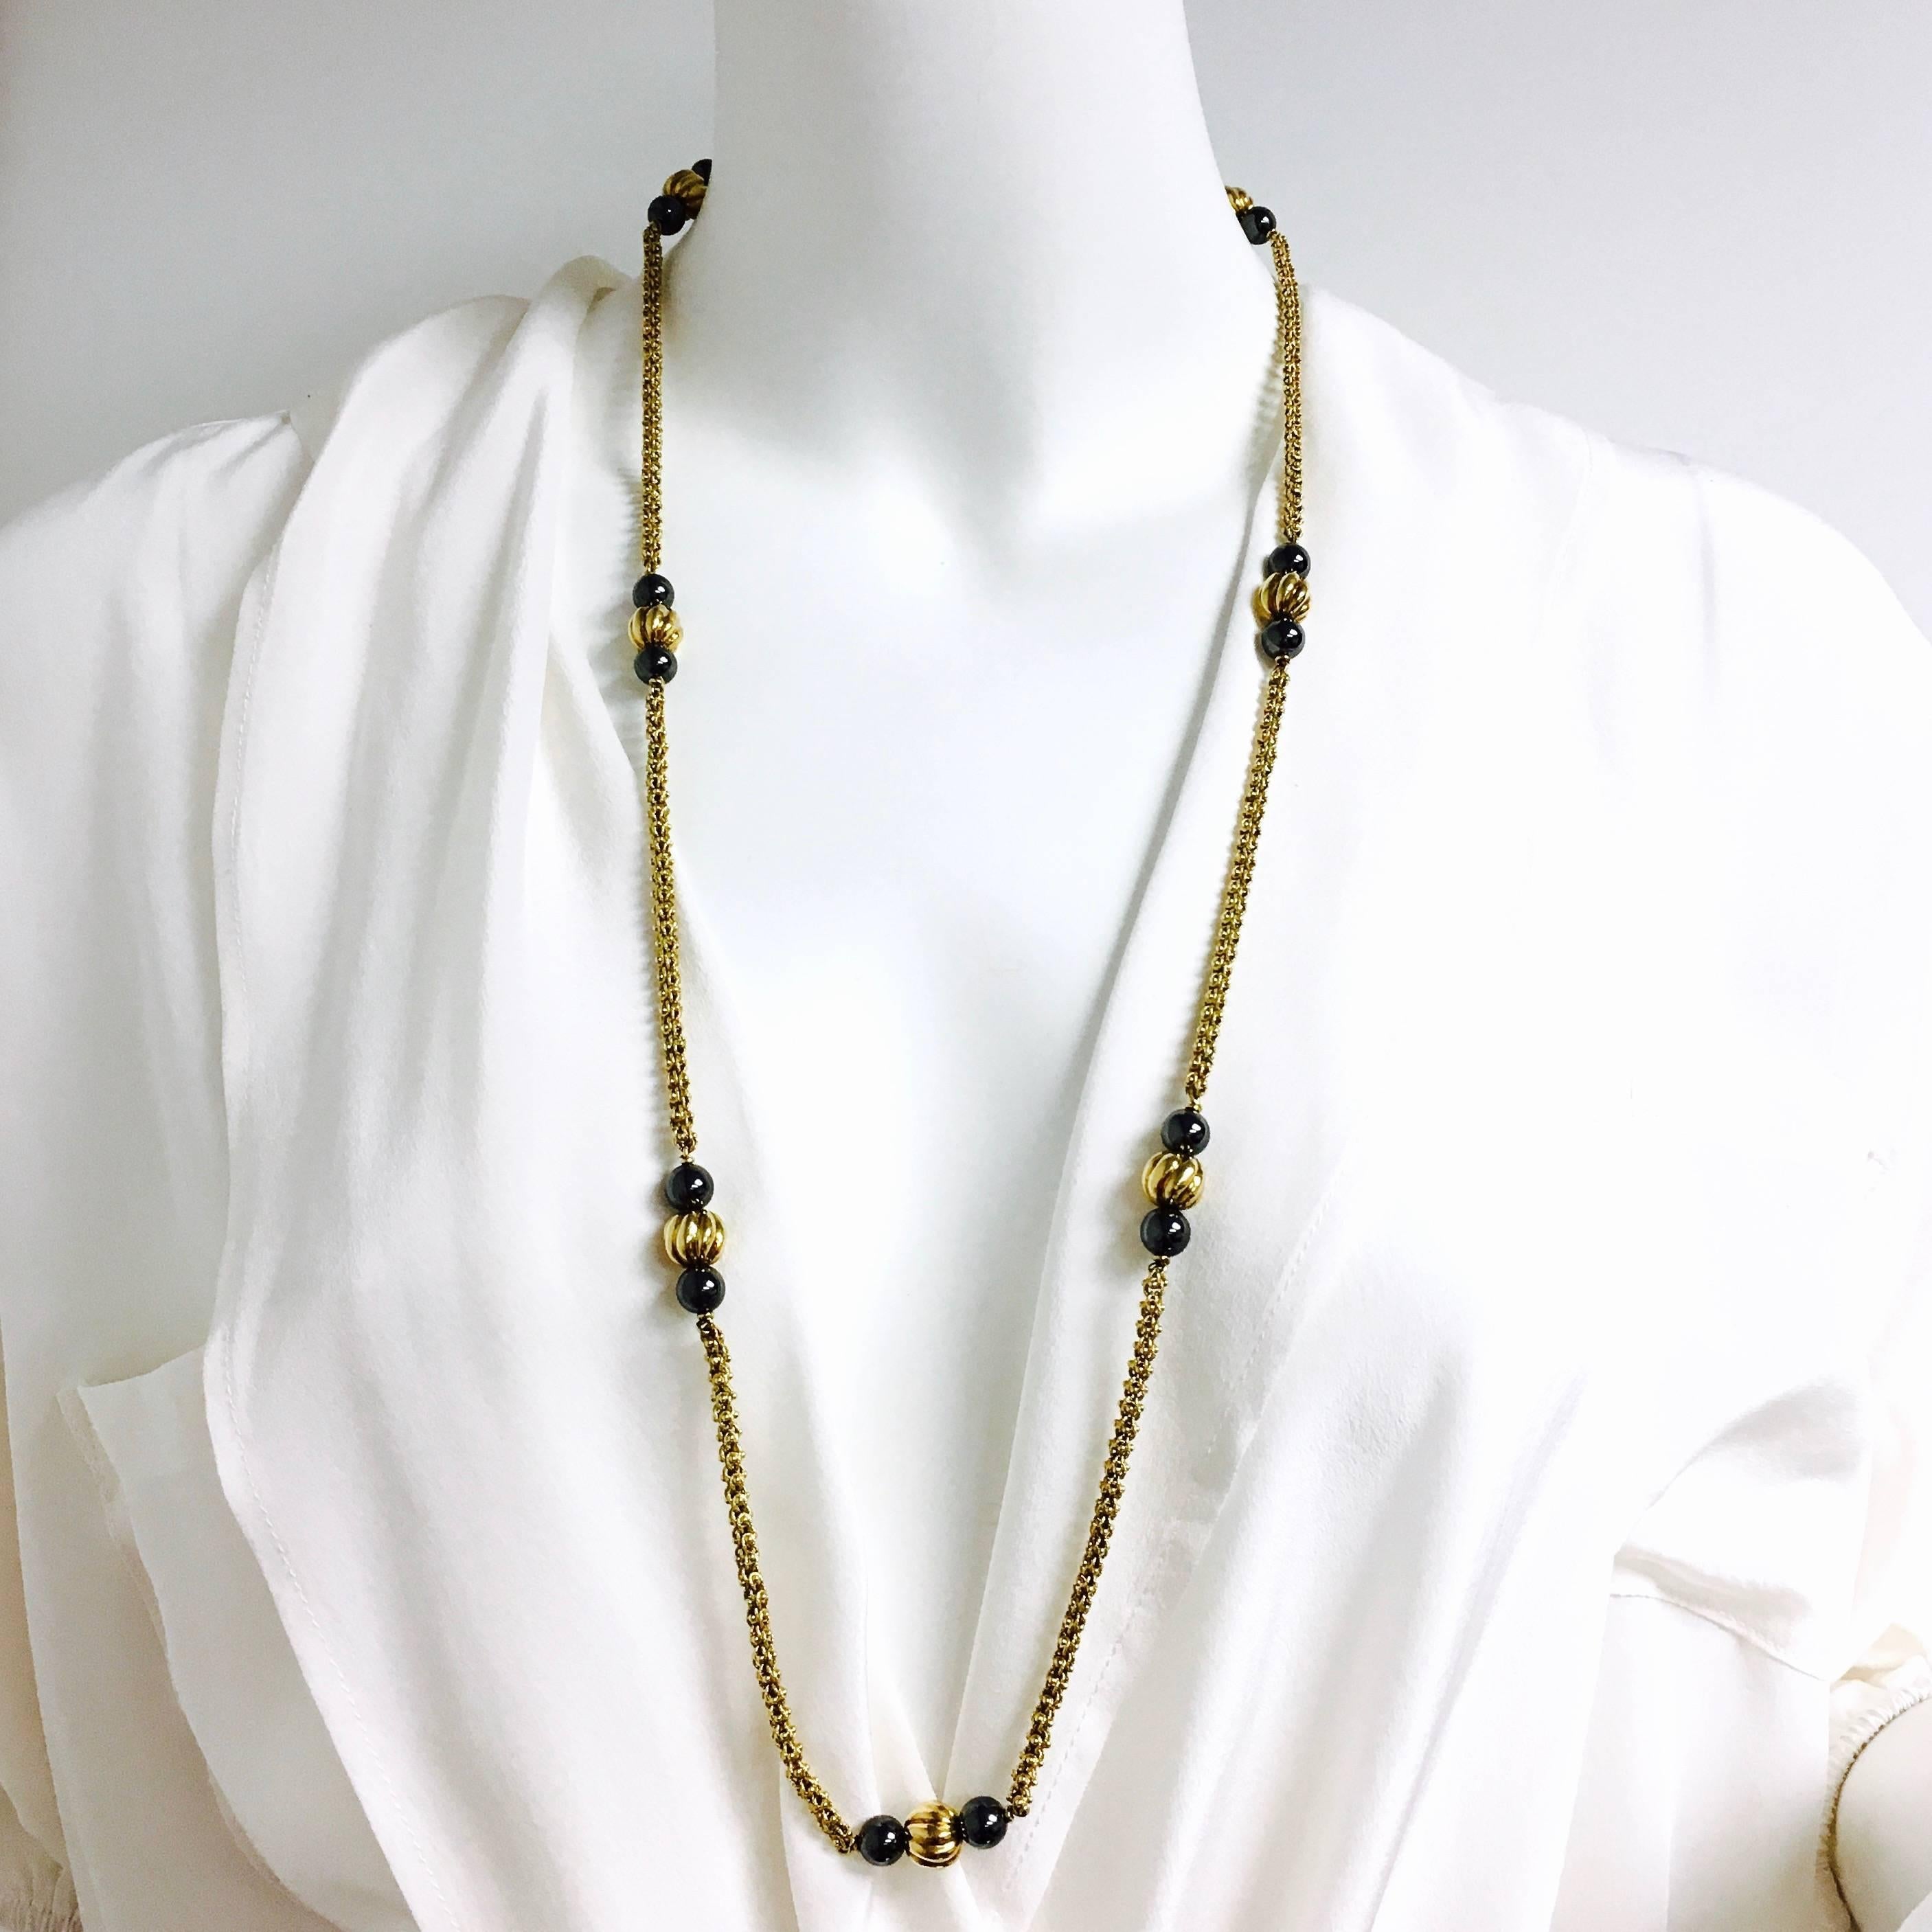 Women's or Men's Vintage Hematite and Yellow Gold Beaded Long Chain Necklace